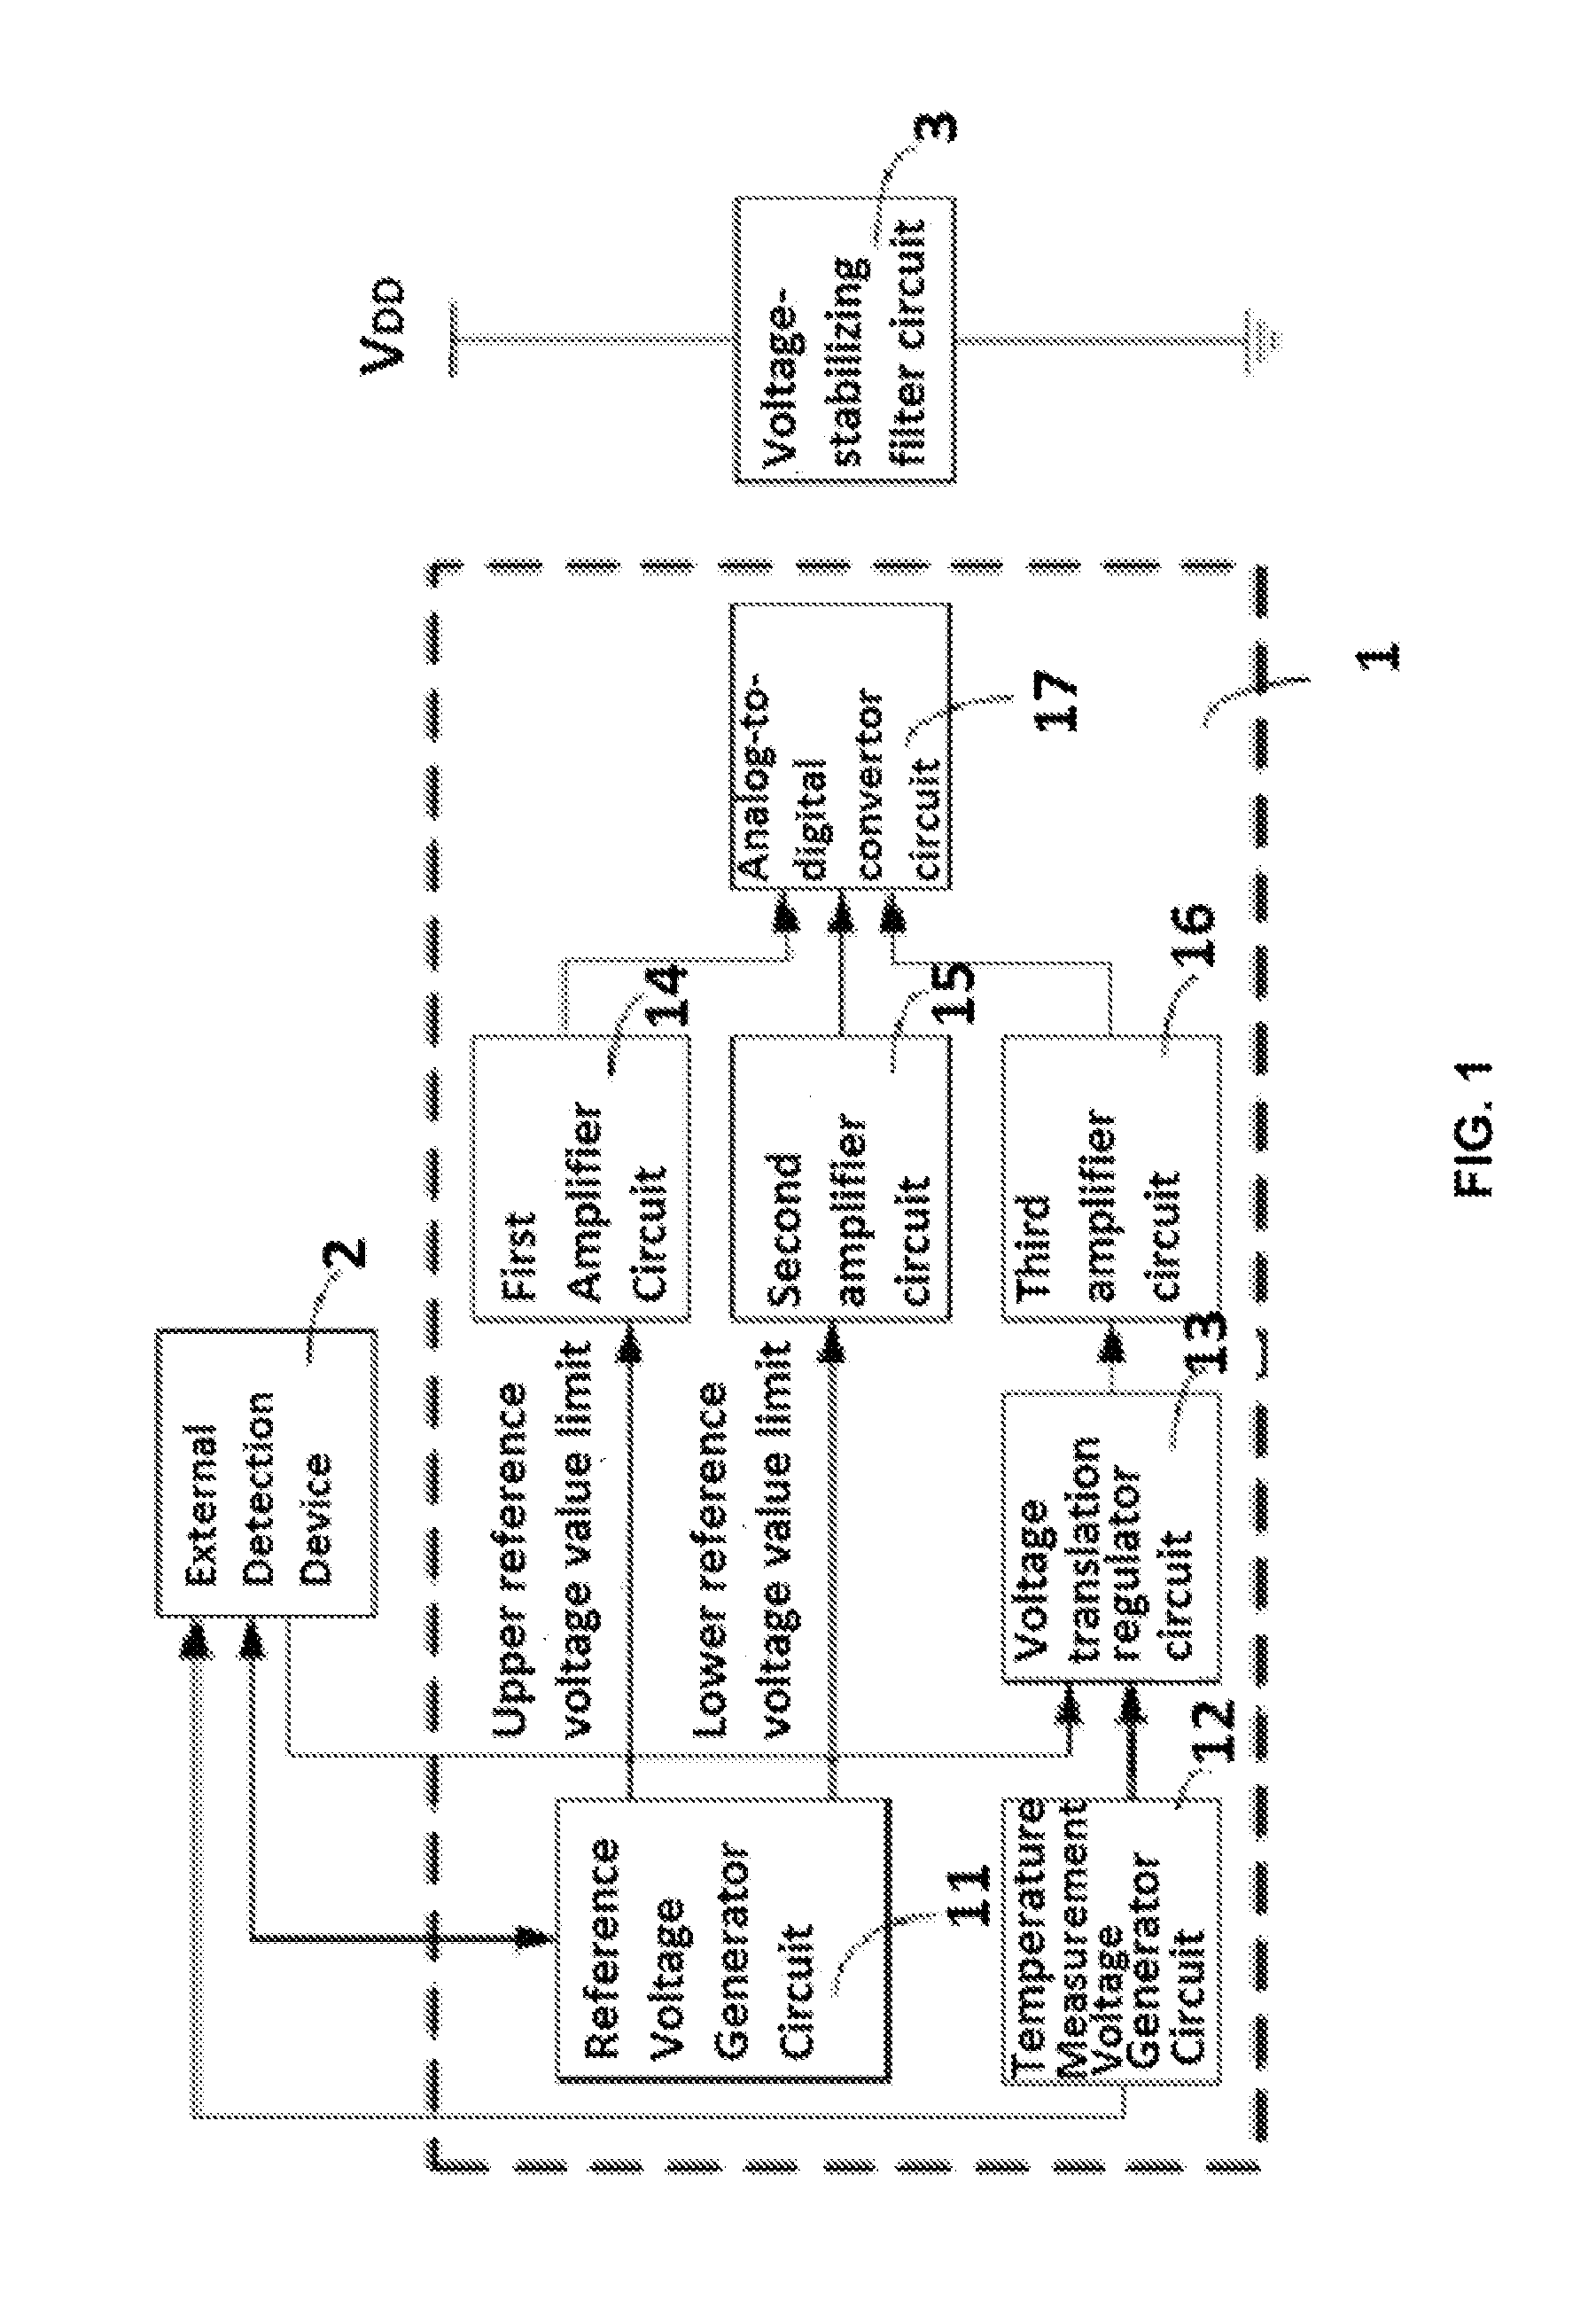 Temperature measurement and calibration circuit, passive radio frequency identification tag and method for measuring temperature